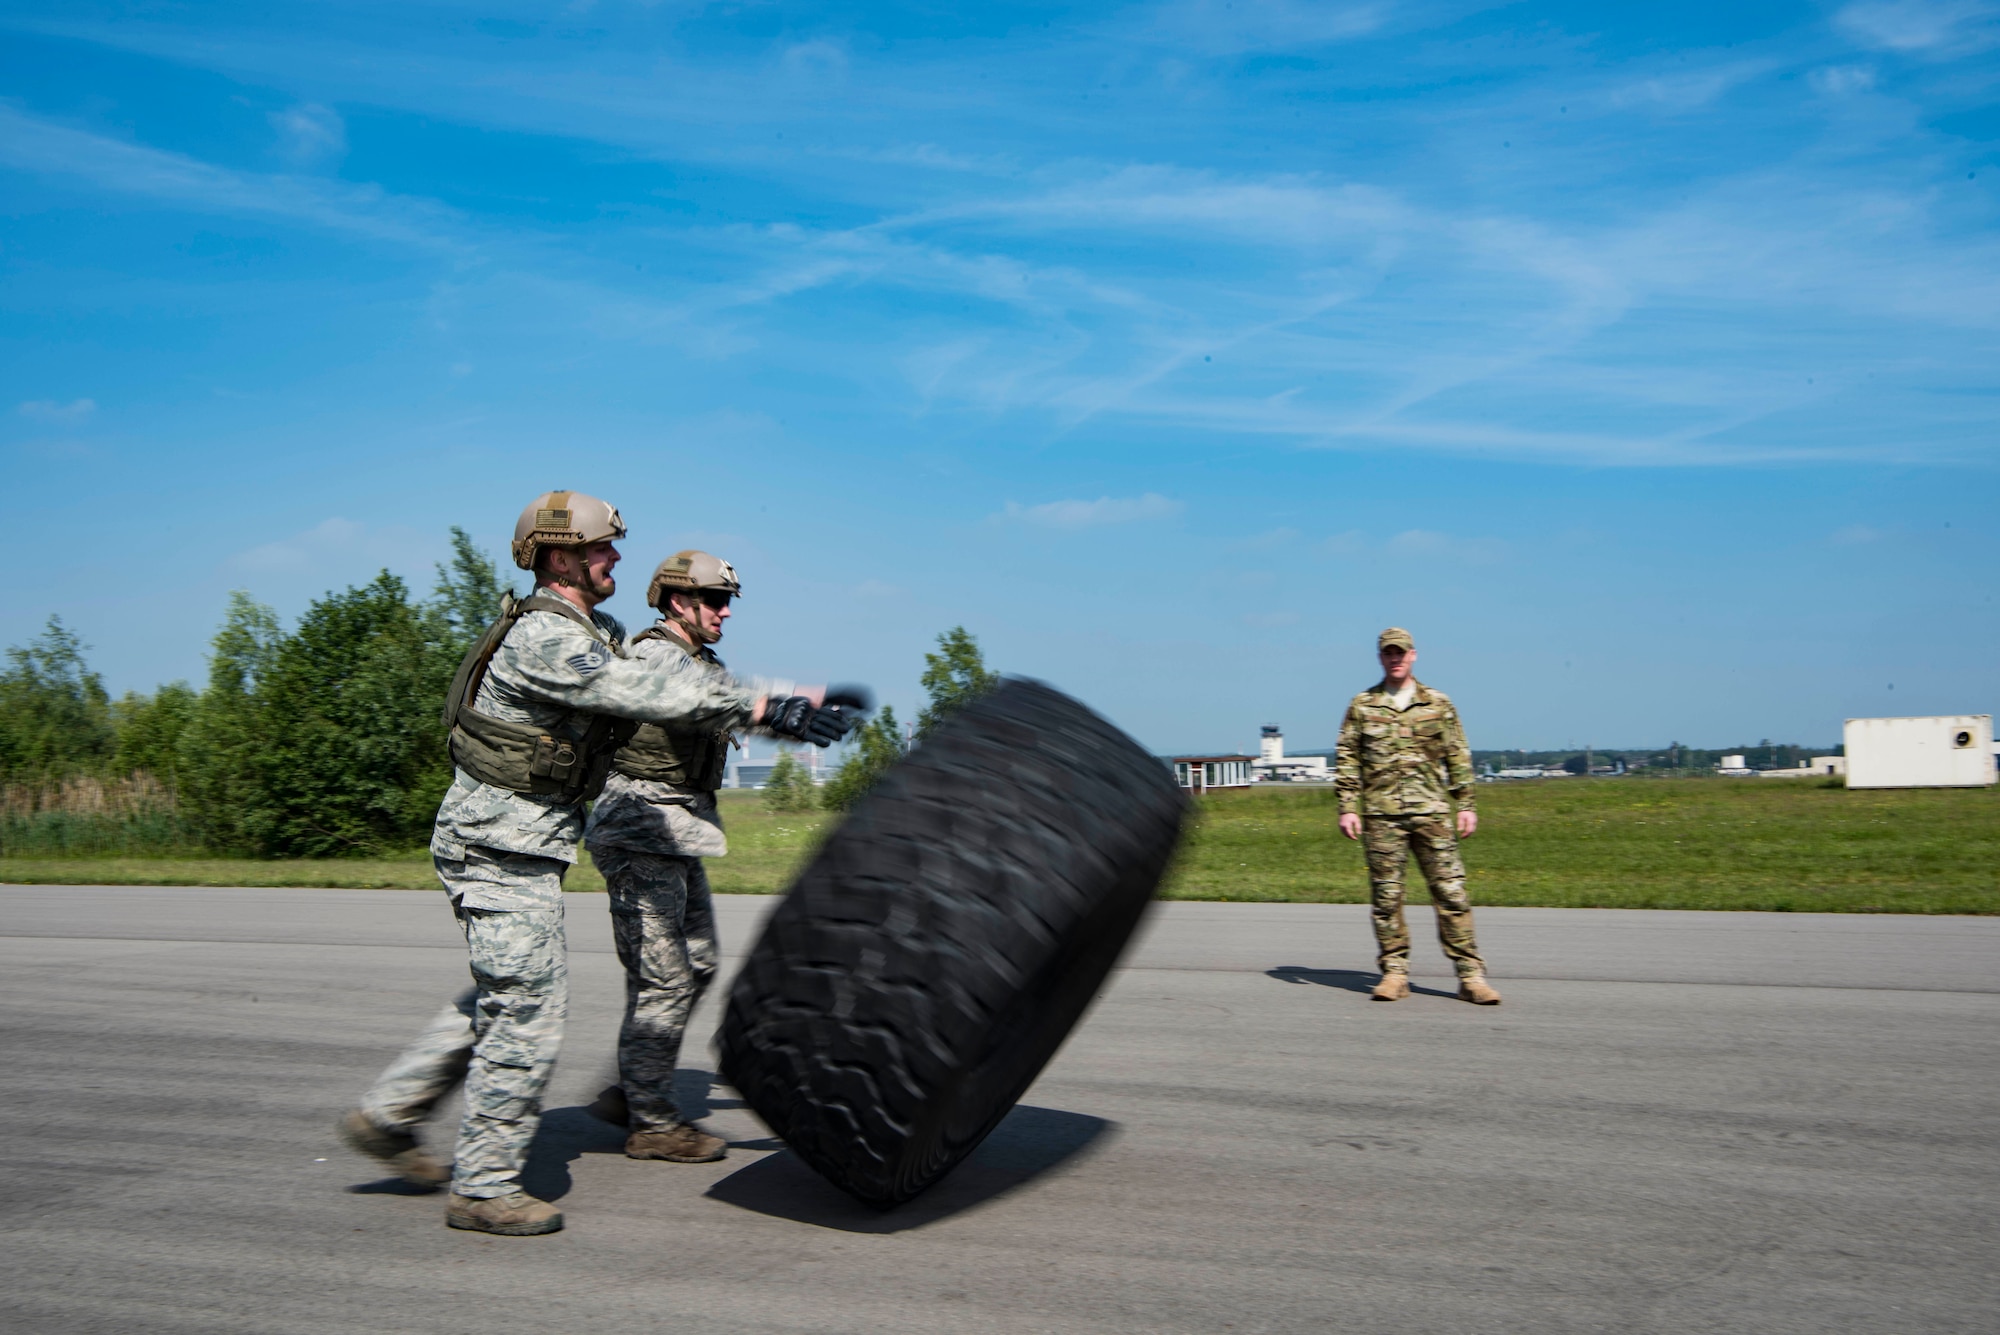 Members of the 435th Contingency Response Group participate in tire flips as part of the obstacle course in the 435th CRG Olympics, which included pushing a Humvee several hundred meters and a 100 meter bear crawl, on Ramstein Air Base, Germany, May 18, 2018. The 435th CRG Olympics provided an opportunity to practice all of their operations in a unique and friendly competition, leaving every Airman with a new appreciation for how their group accomplishes the mission.